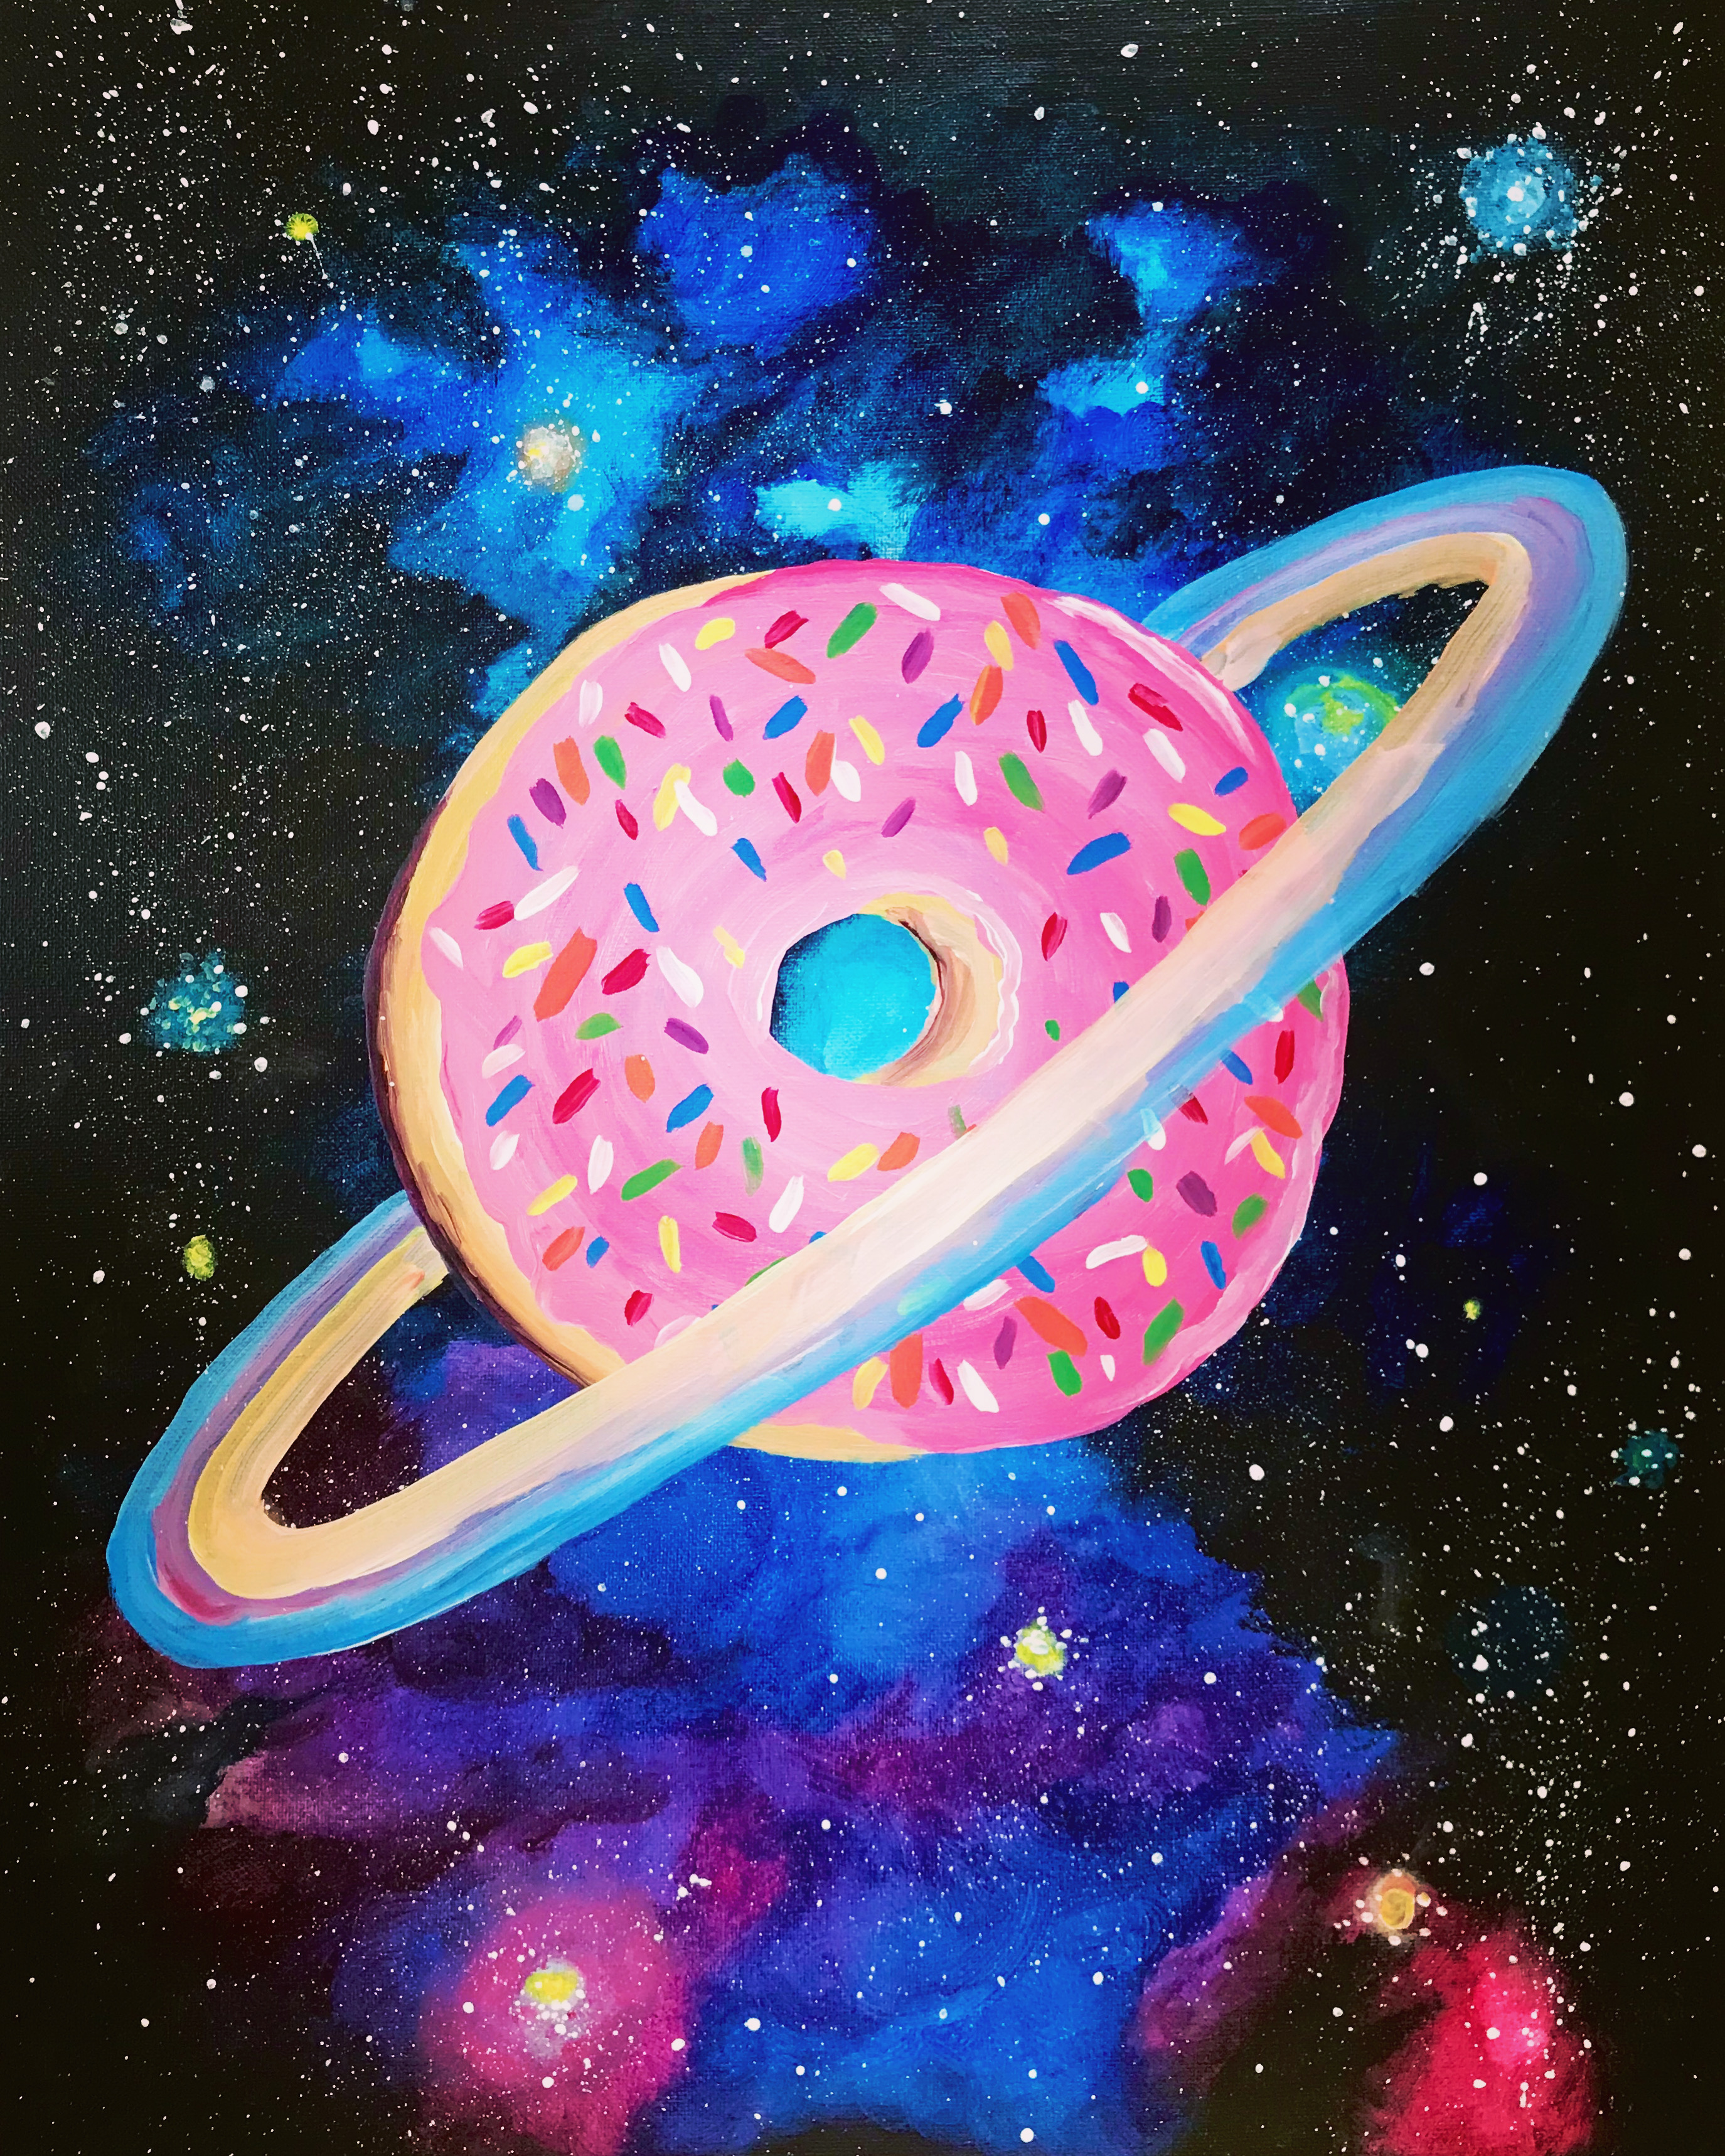 A Deep Space Donut experience project by Yaymaker